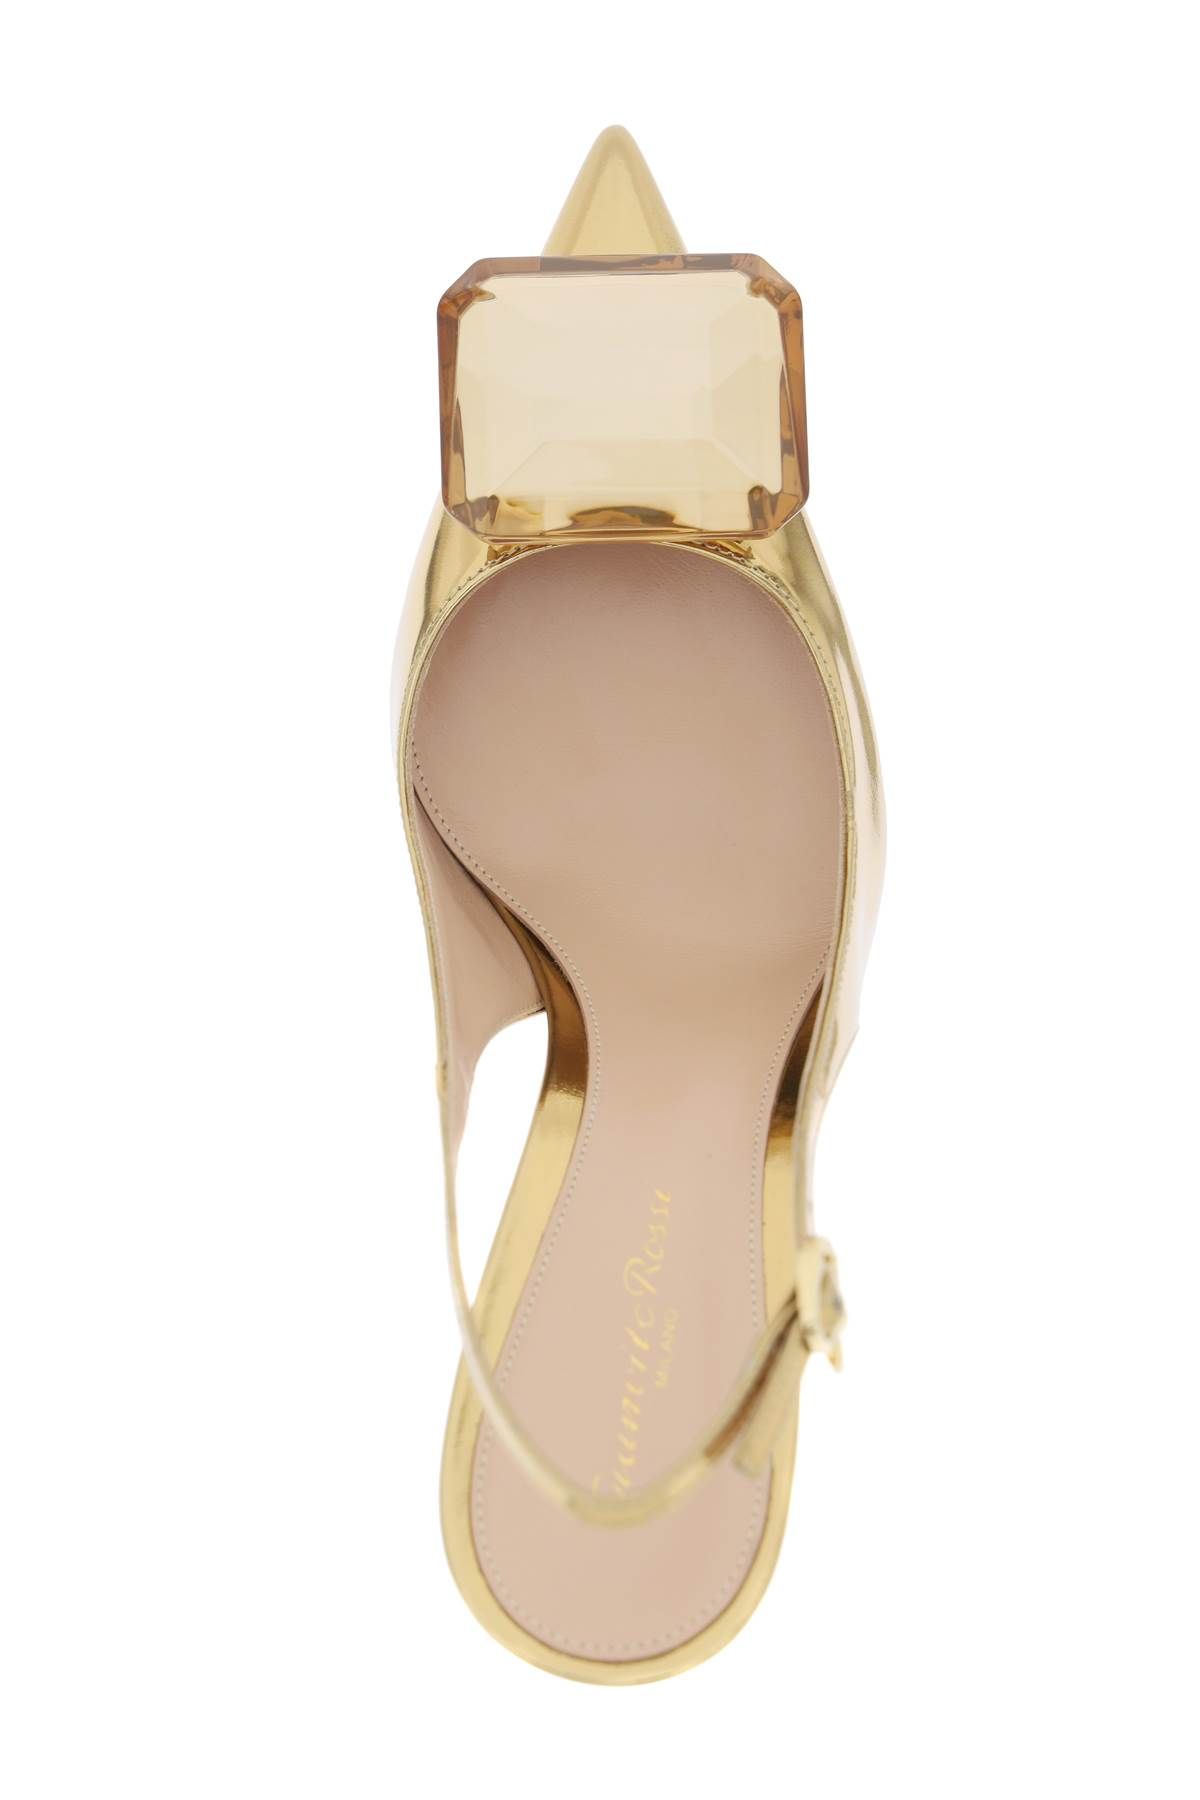 Shop Gianvito Rossi Jaipur Slingback Pumps In Gold